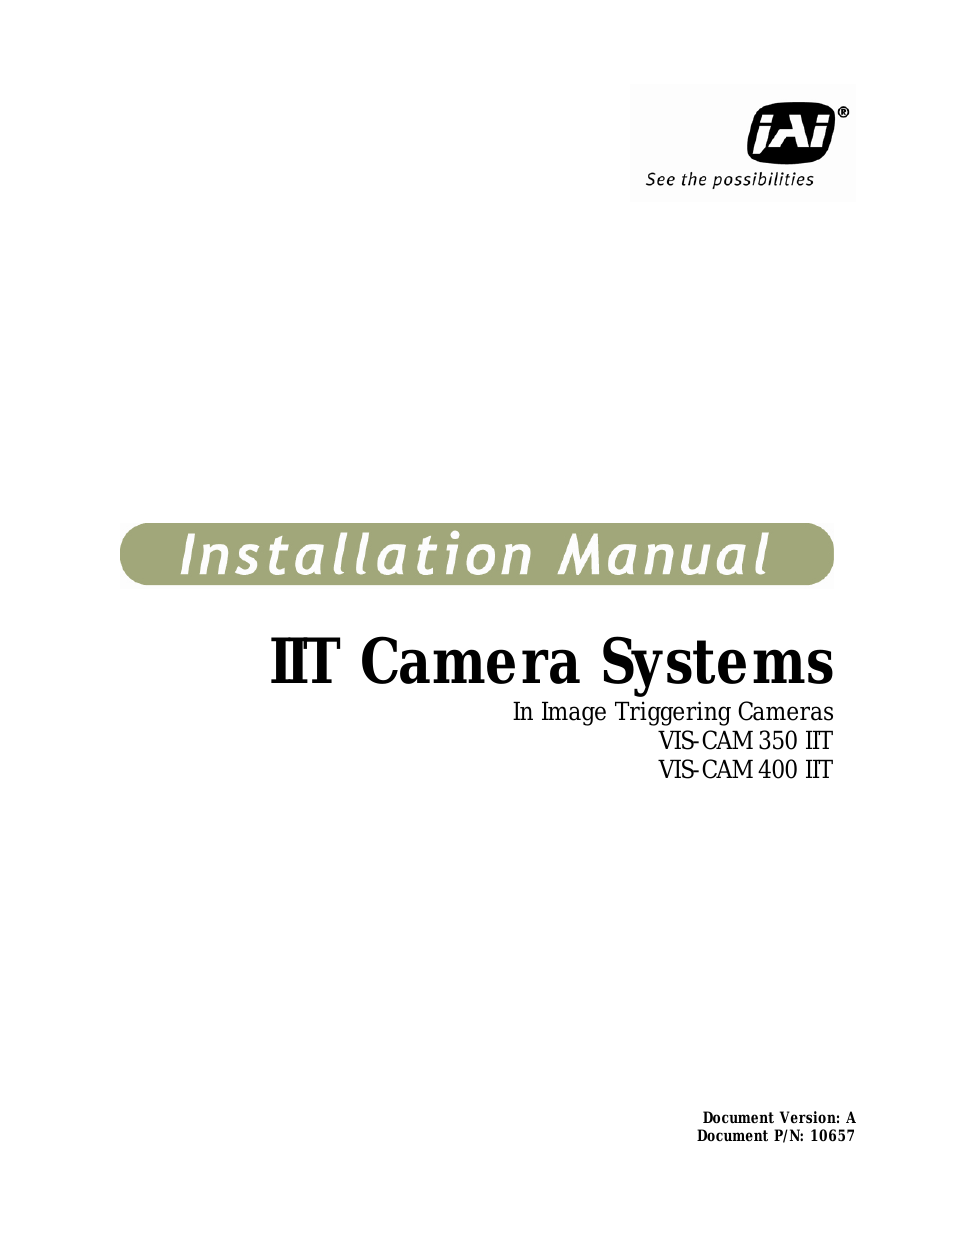 IIT Camera Systems VIS-CAM 400